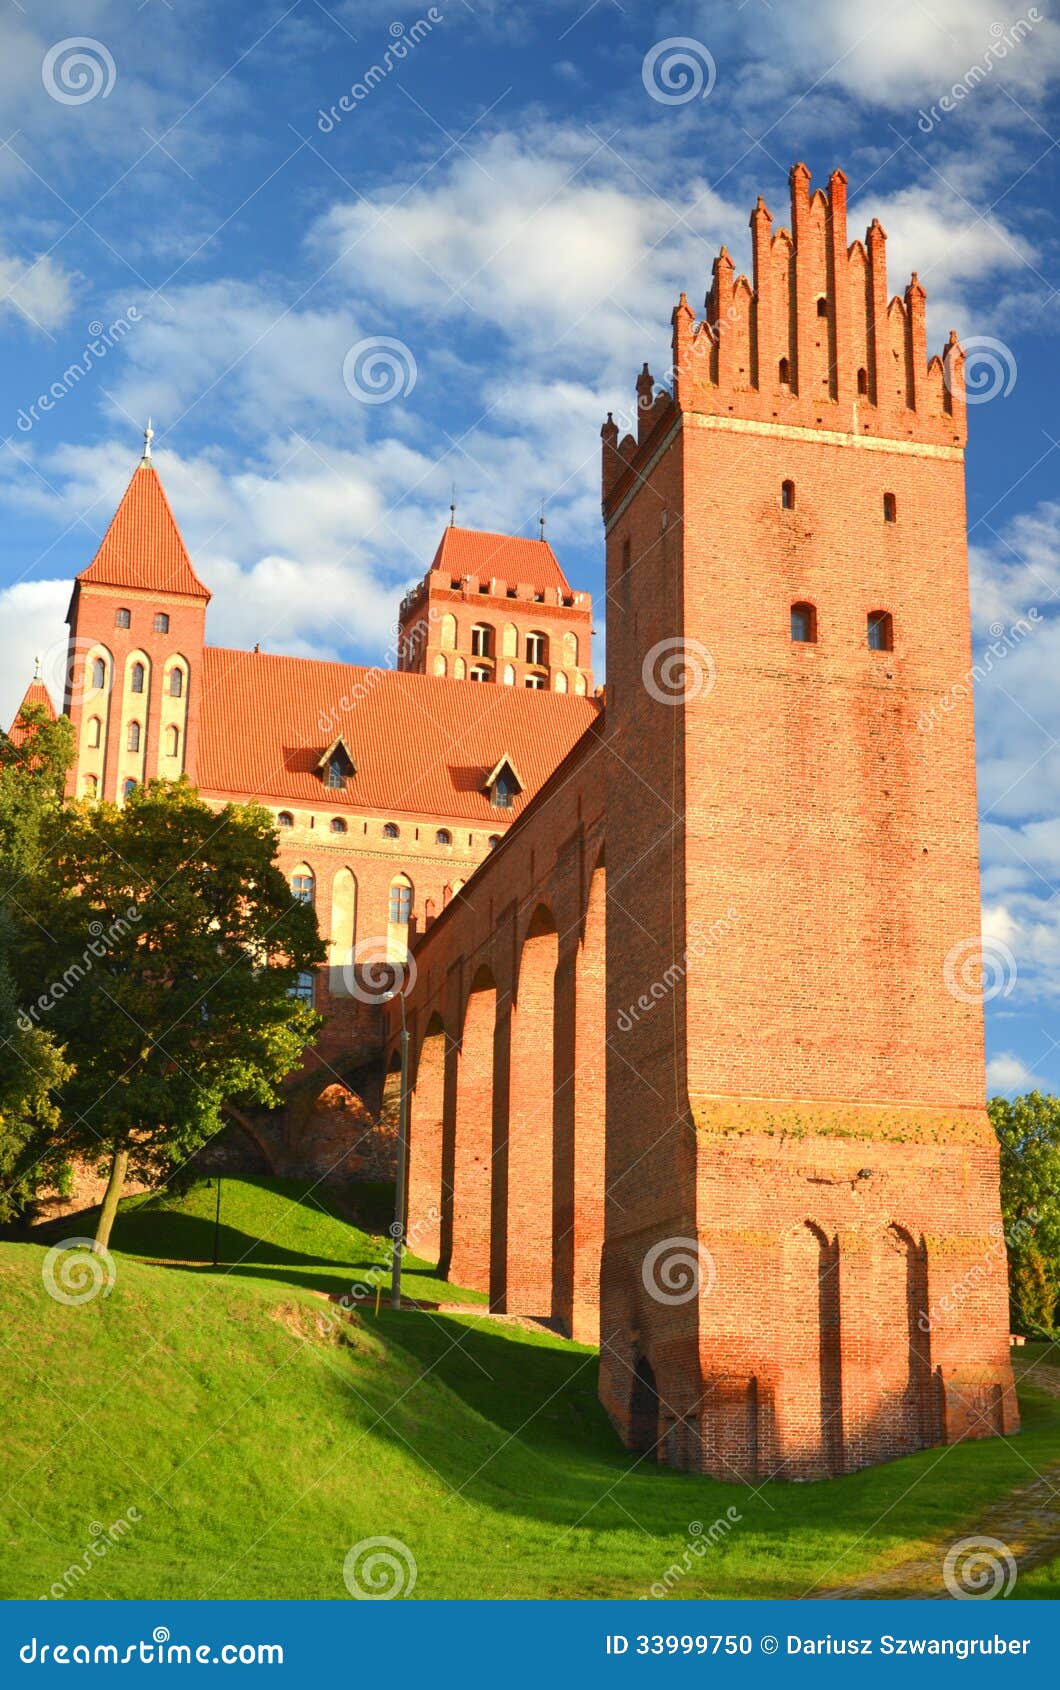 picturesque view of kwidzyn cathedral in pomerania region, poland